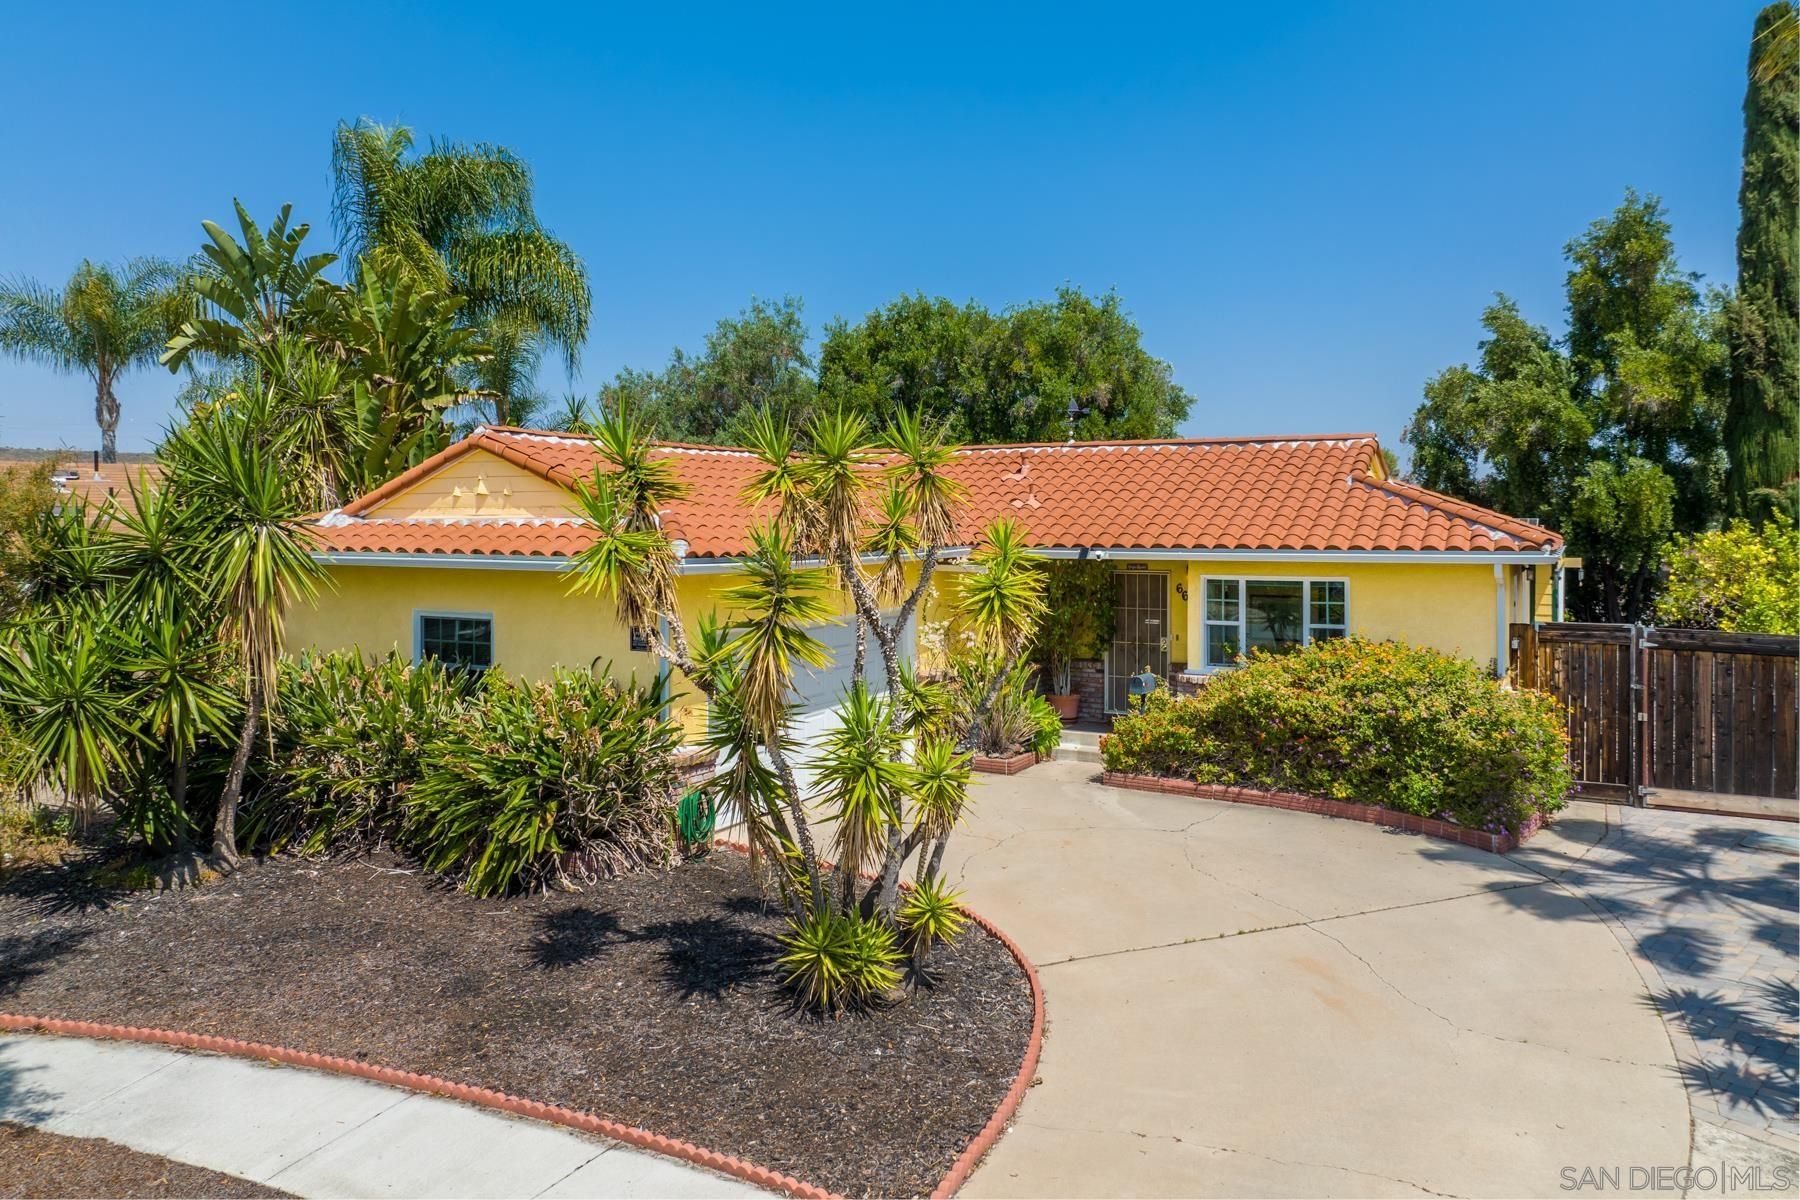 New property listed in Metro Uptown, San Diego